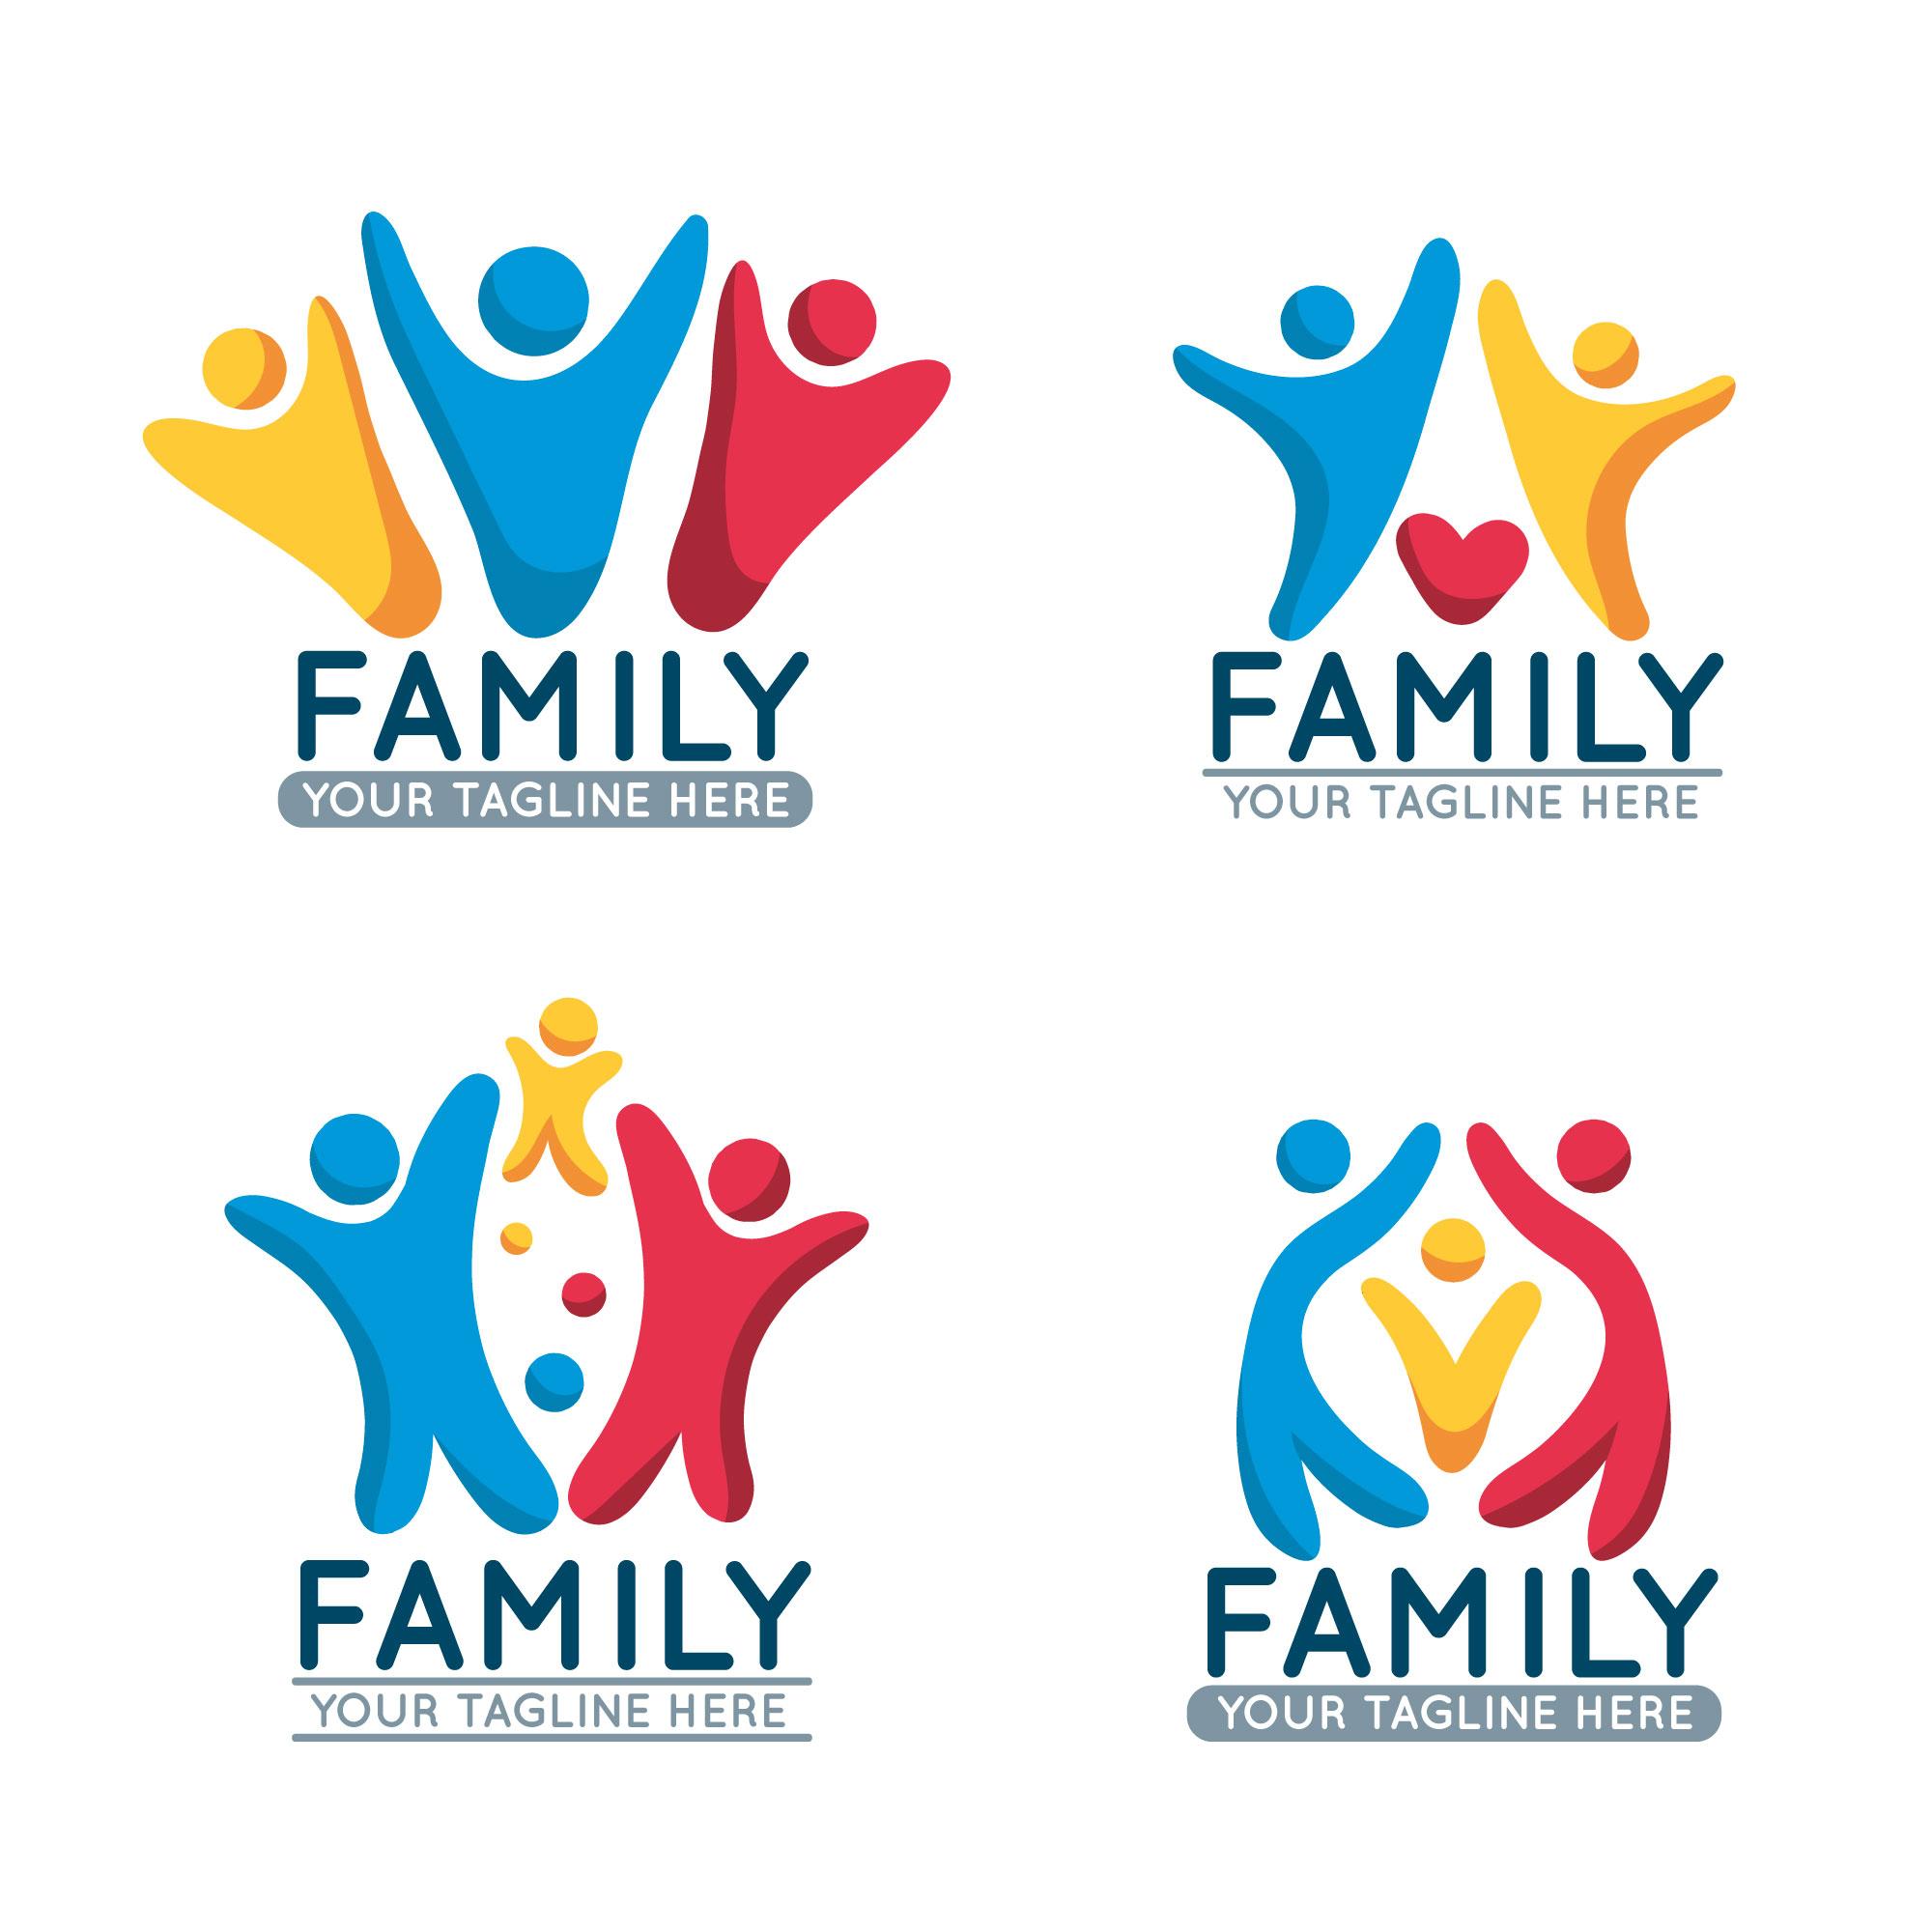 Family Logo Collection cover image.